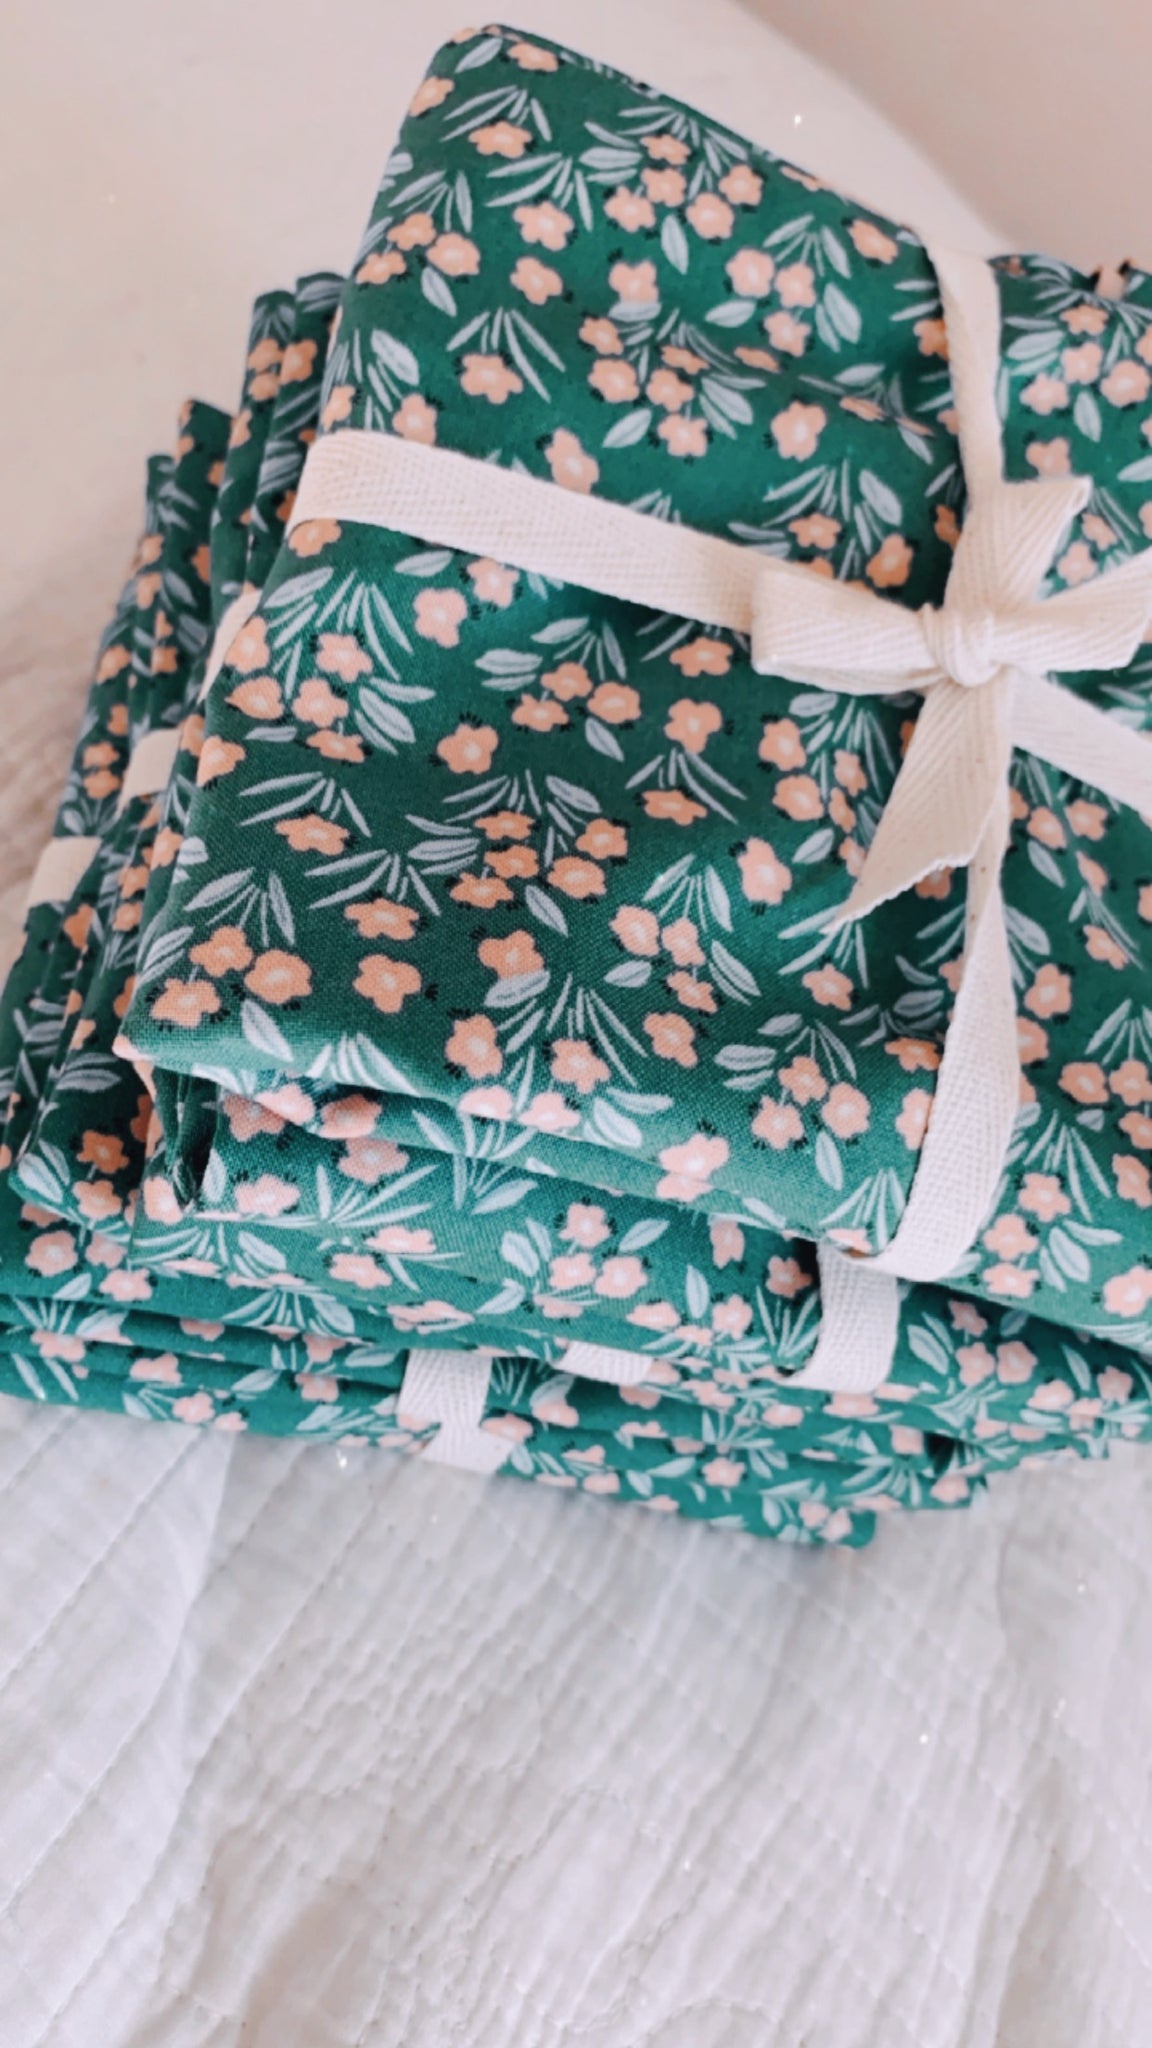 GREEN FLOWER TOTE